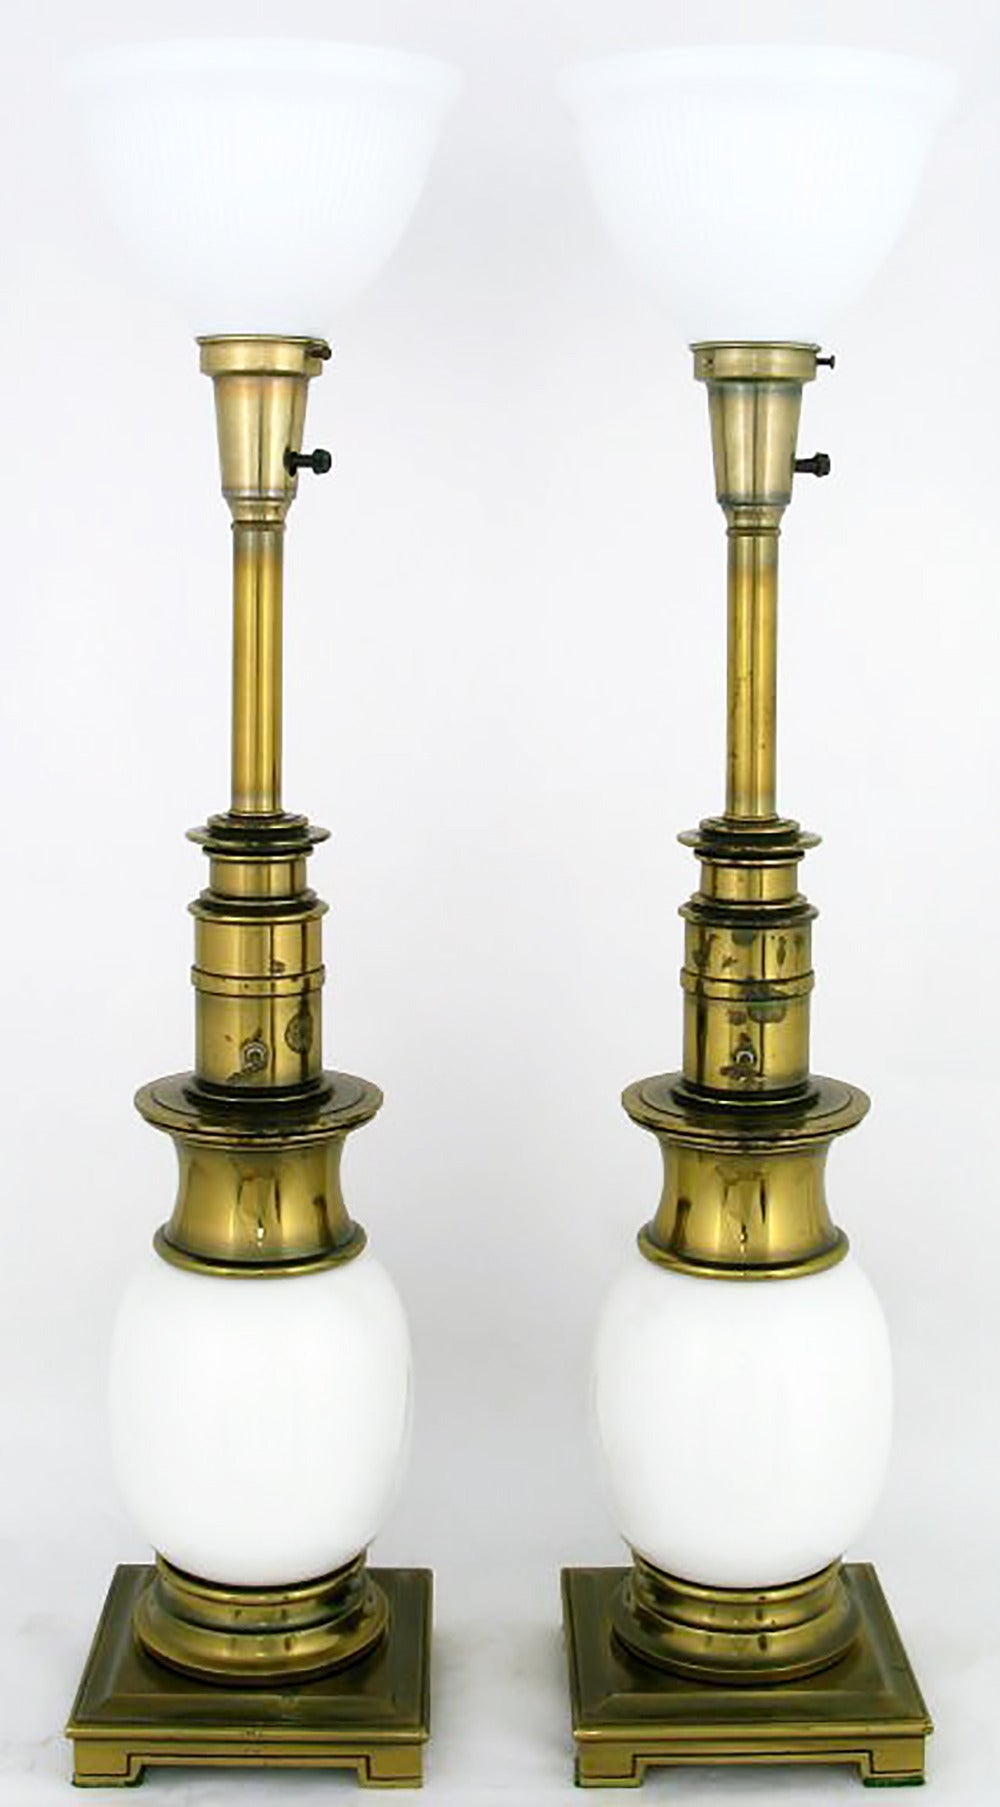 A very elegant pair of table lamps from Stiffeal. They feature 